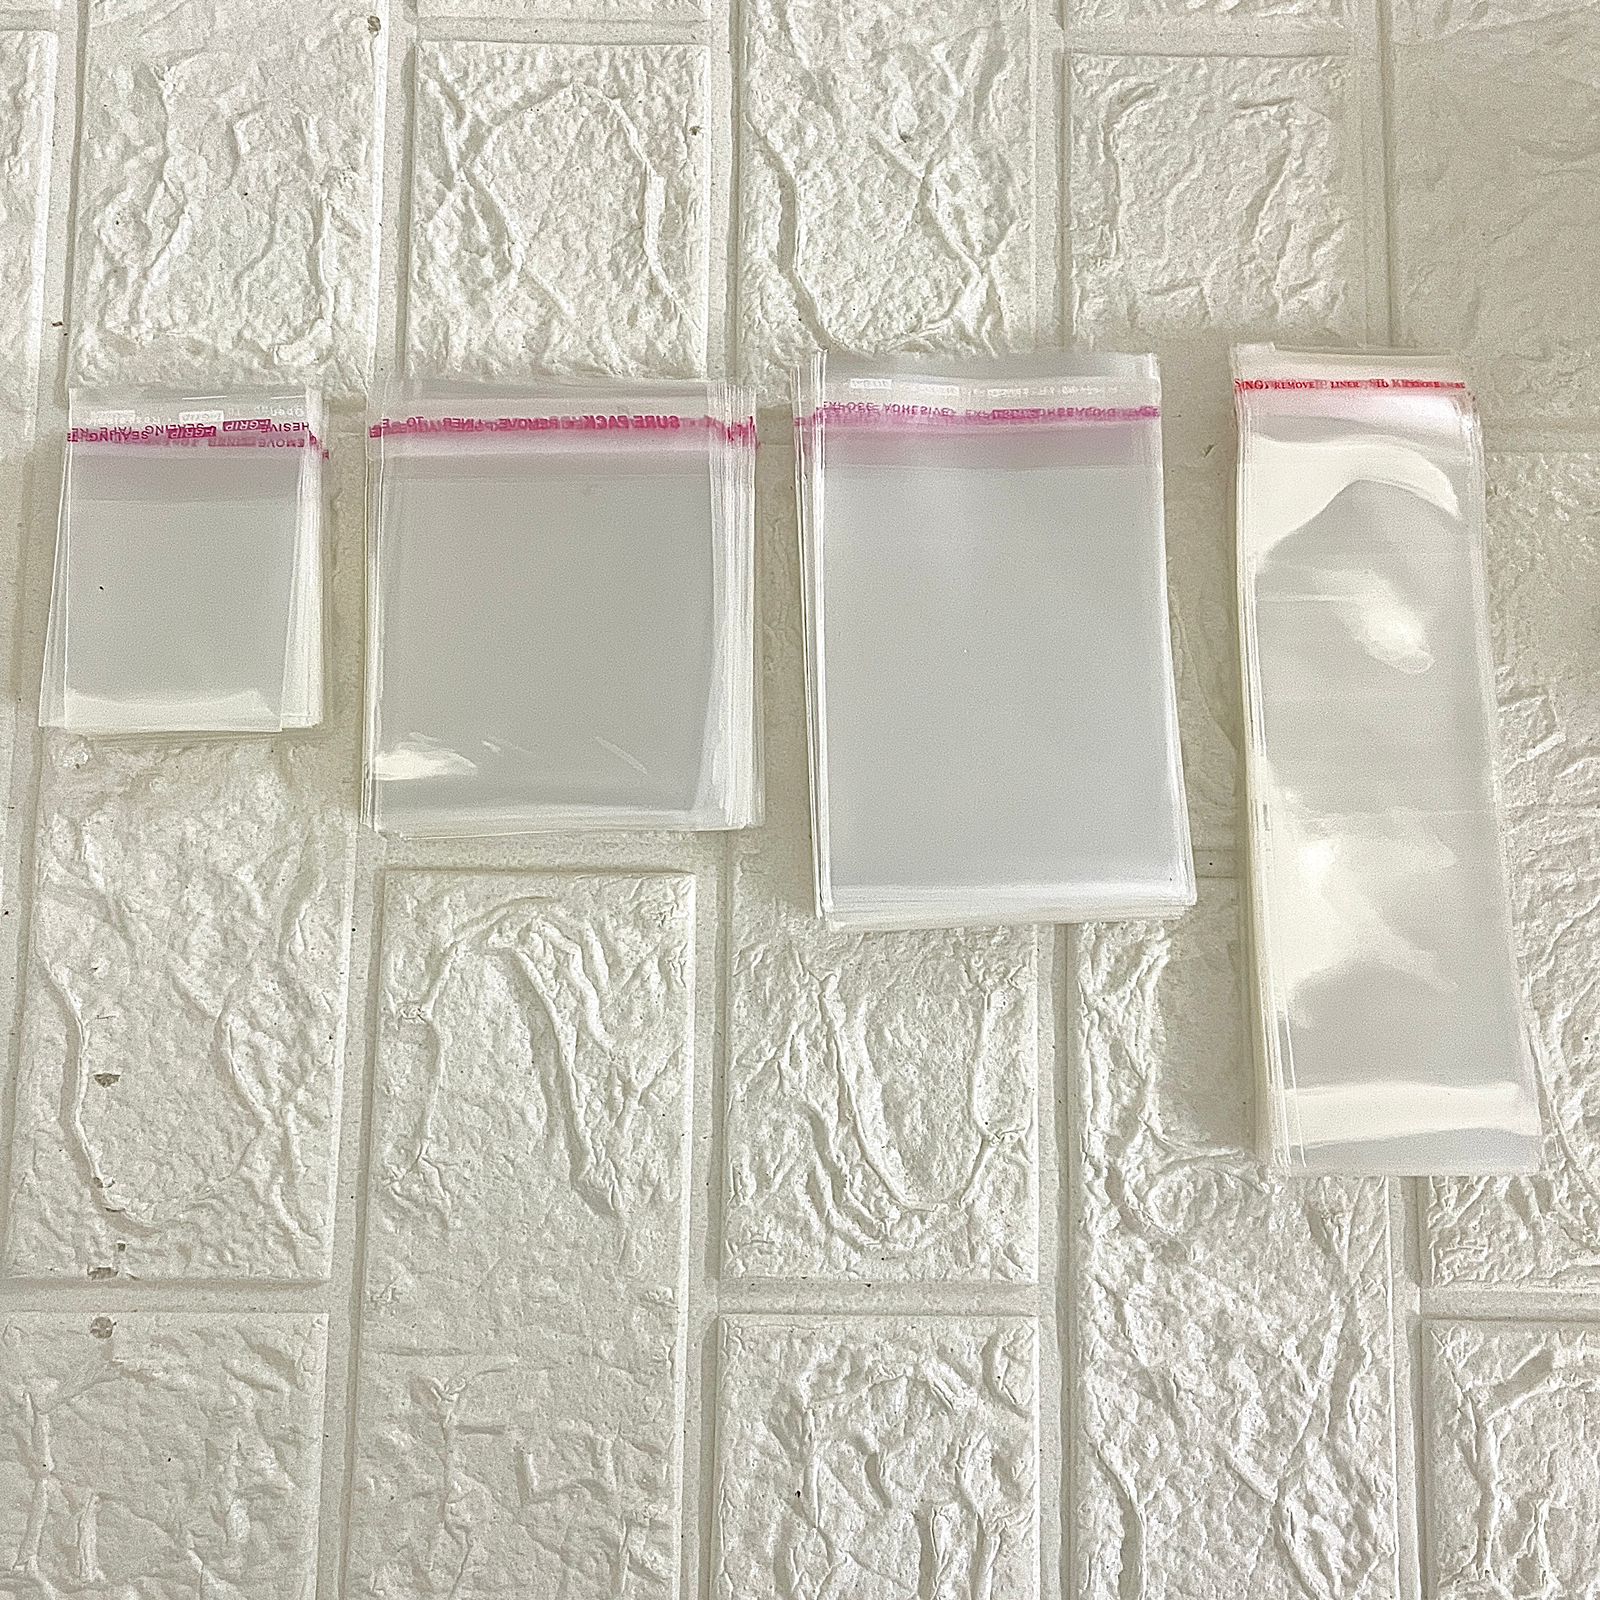 Transparent Packing packets